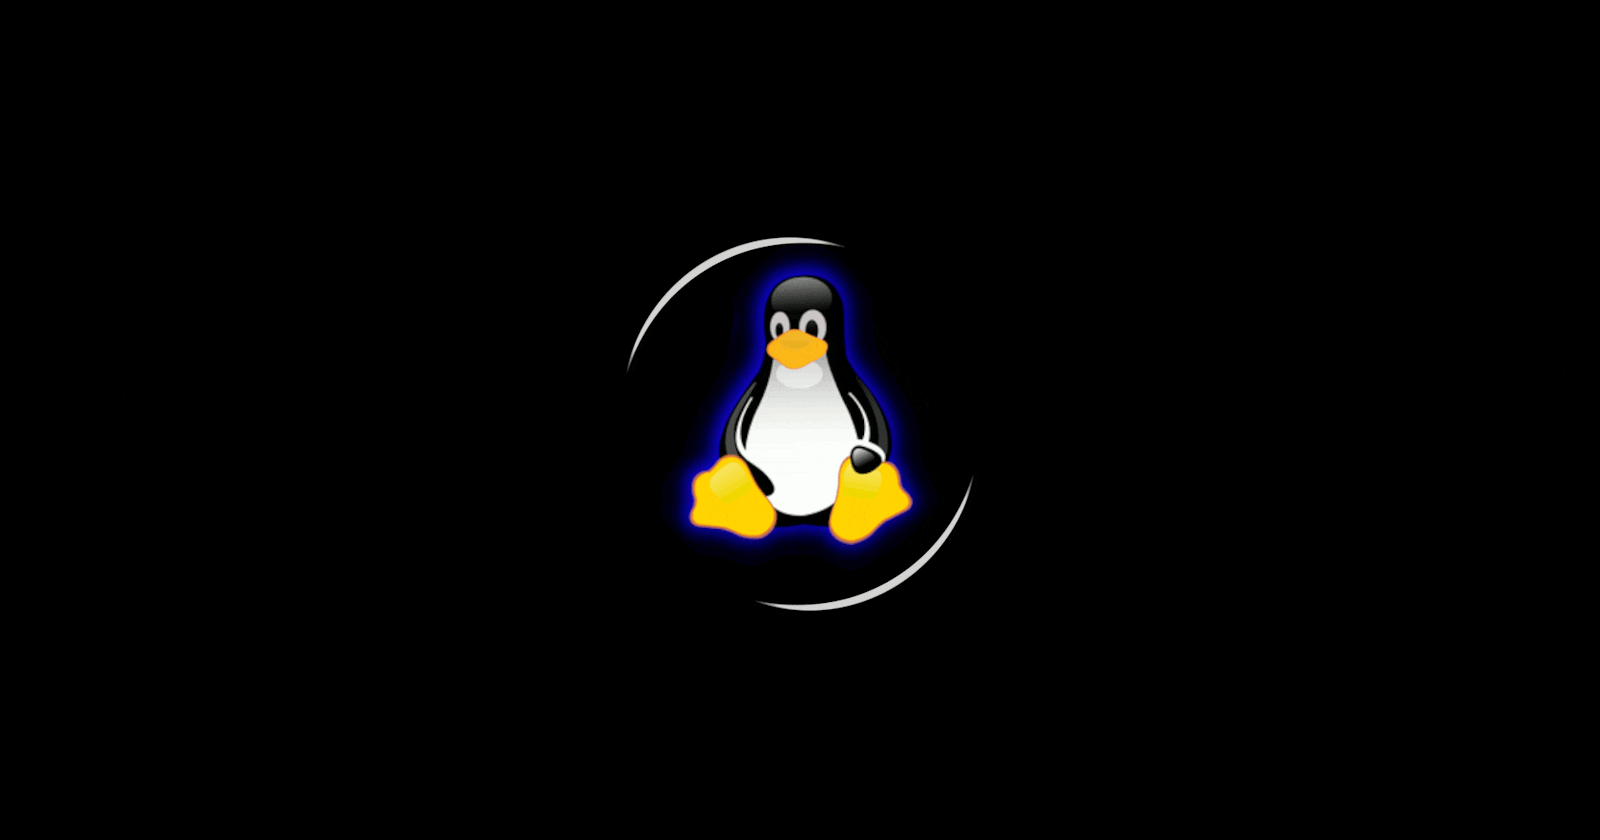 #Day 2 - Linux : A Beginner's Guide